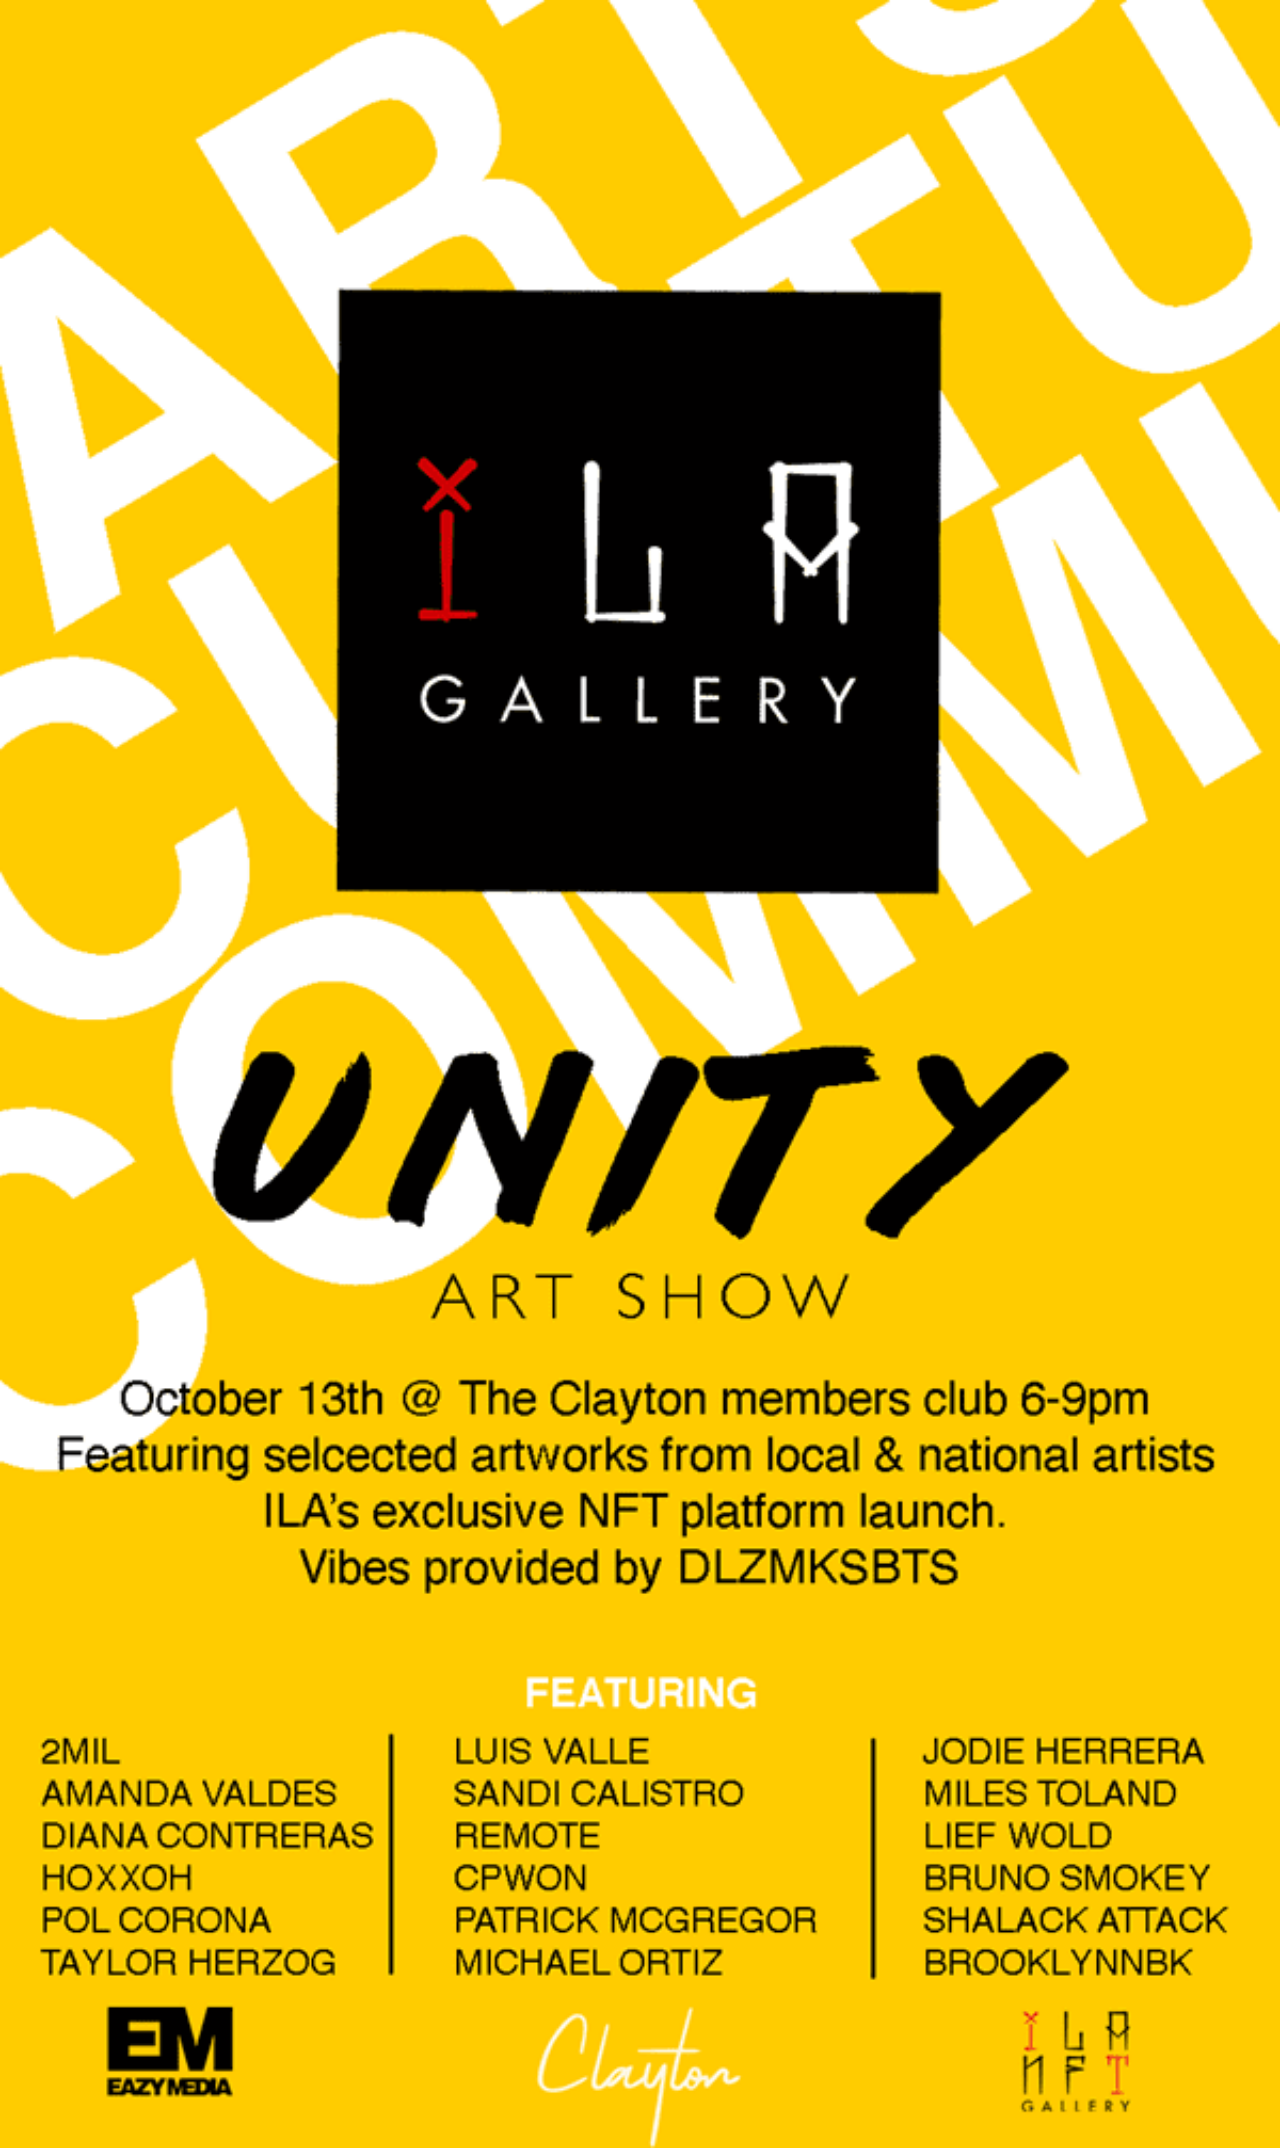 Yellow Unity Art Show Flyer For October 13th being held at The Clayton Members Club & Hotel